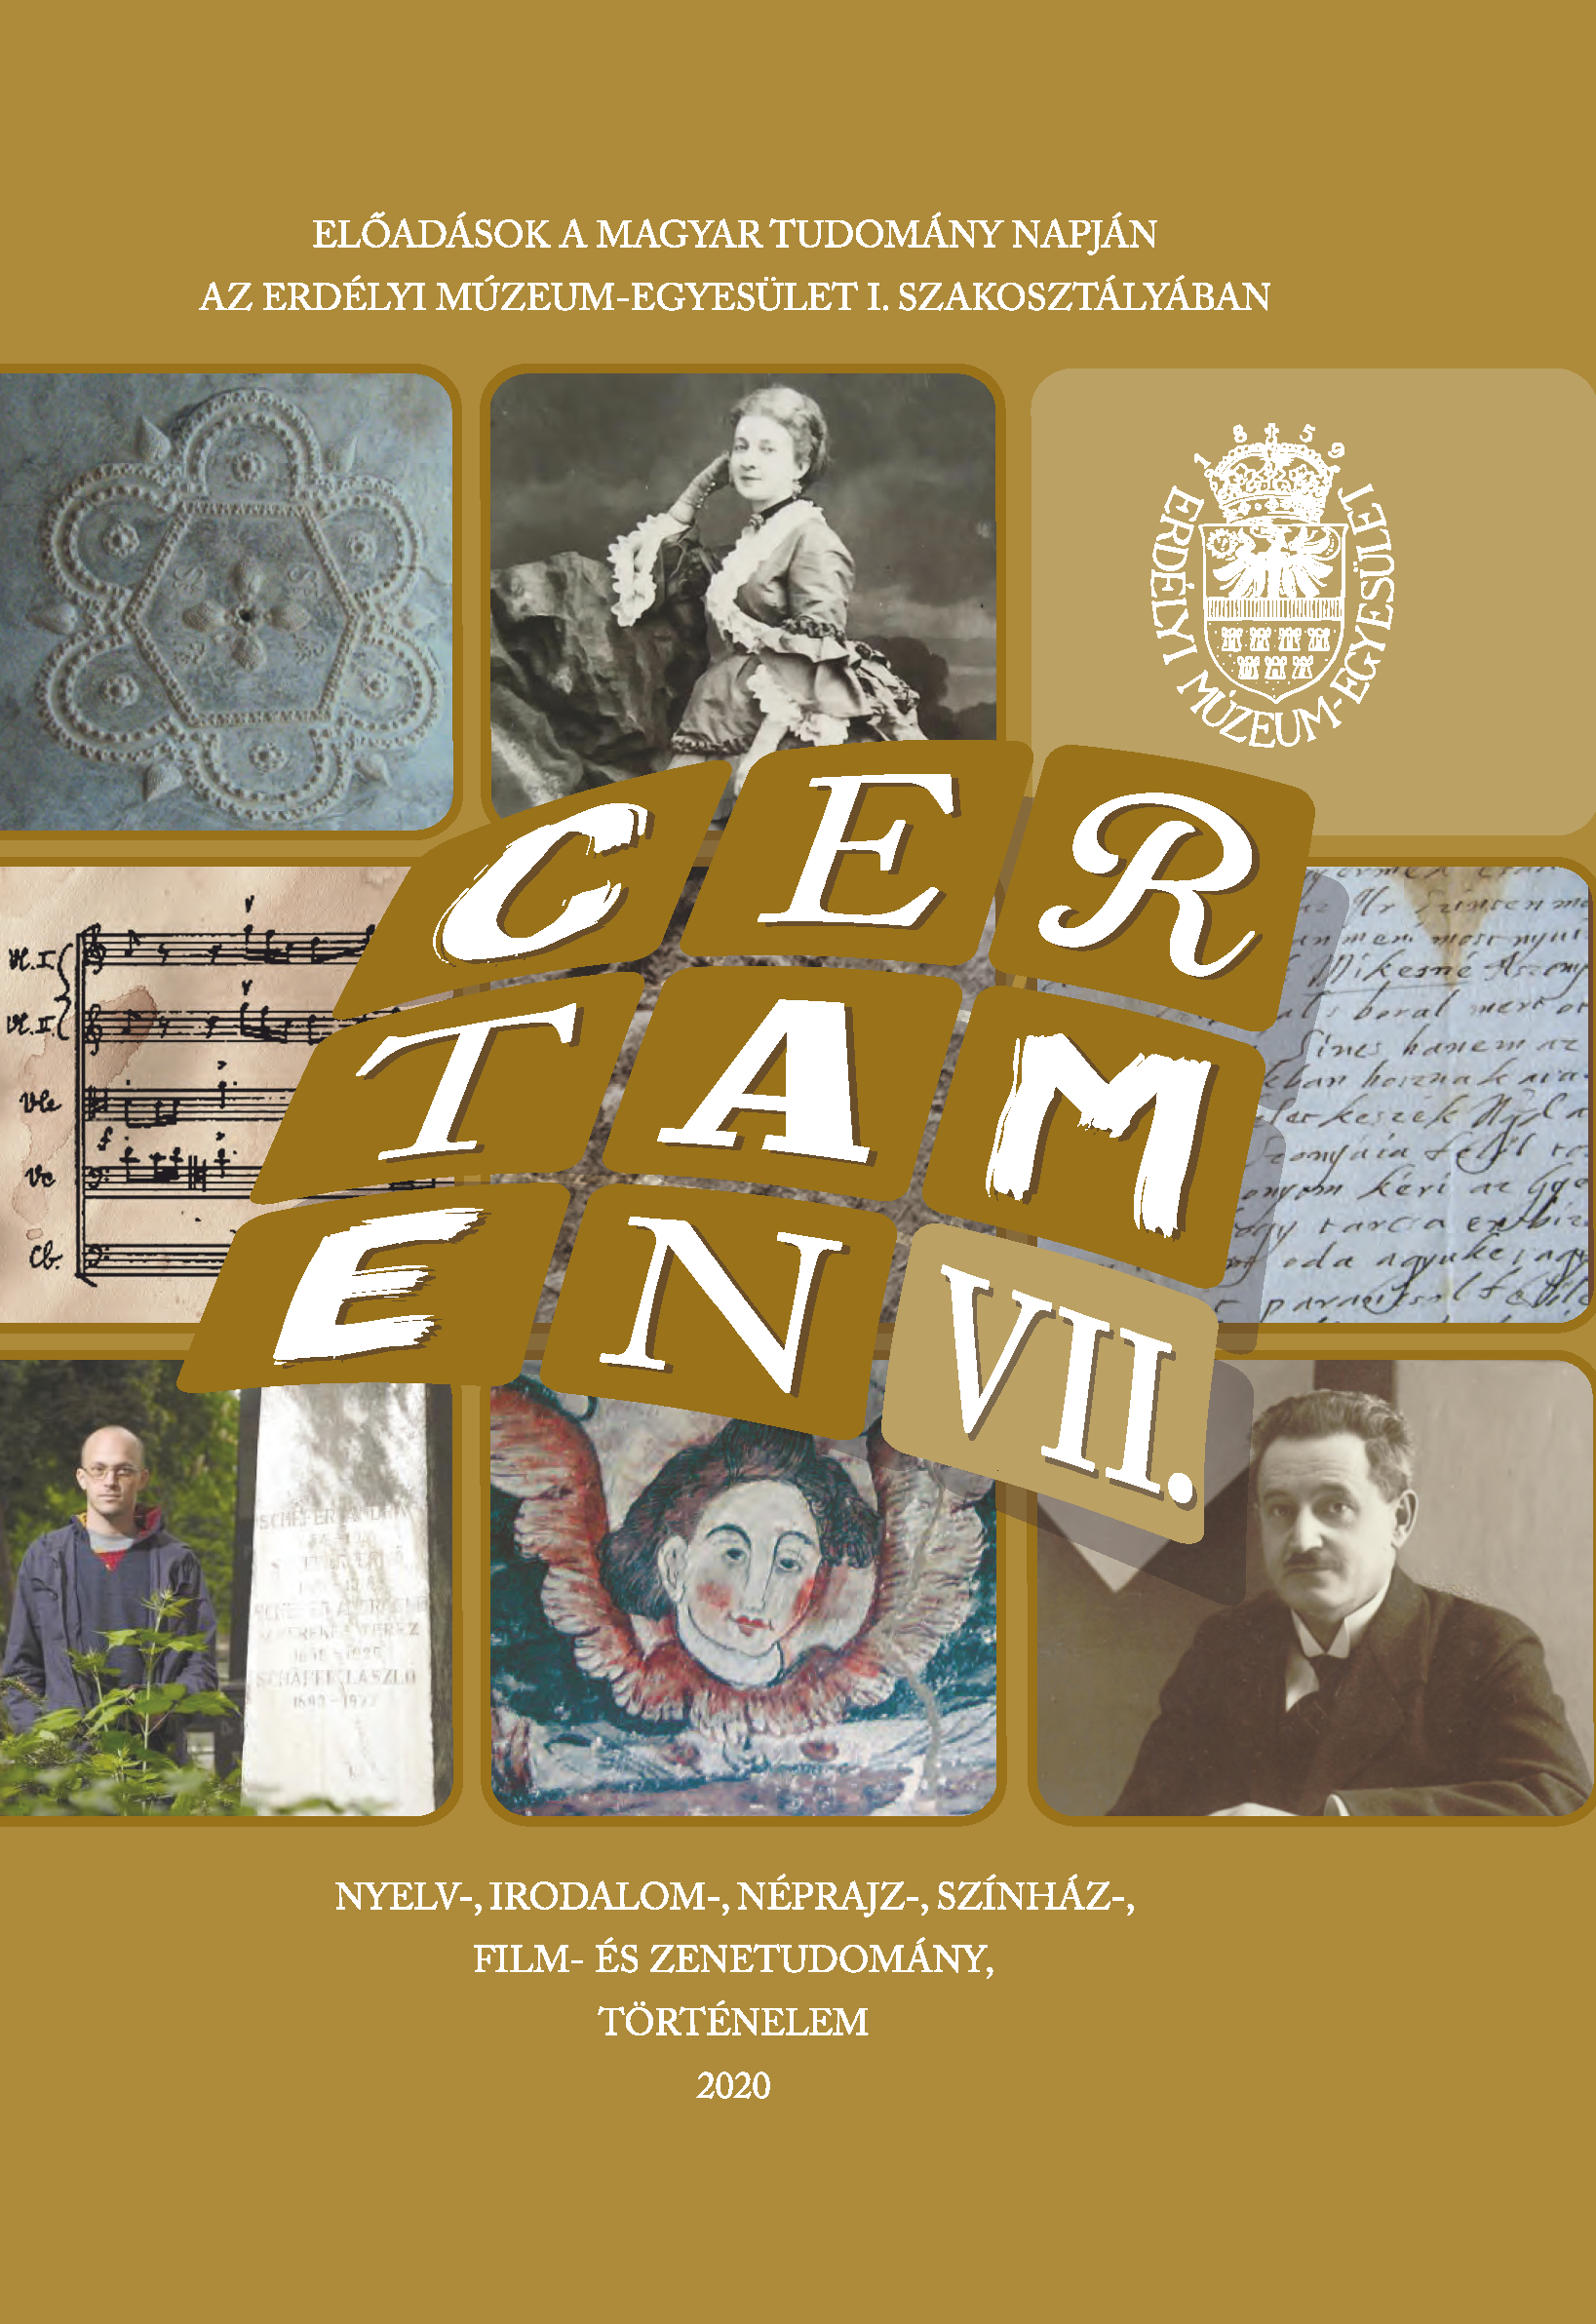 Aladár Bán’s Finnish Correspondence. Contributions to the History of the Finnish-Hungarian Cultural Relations Cover Image